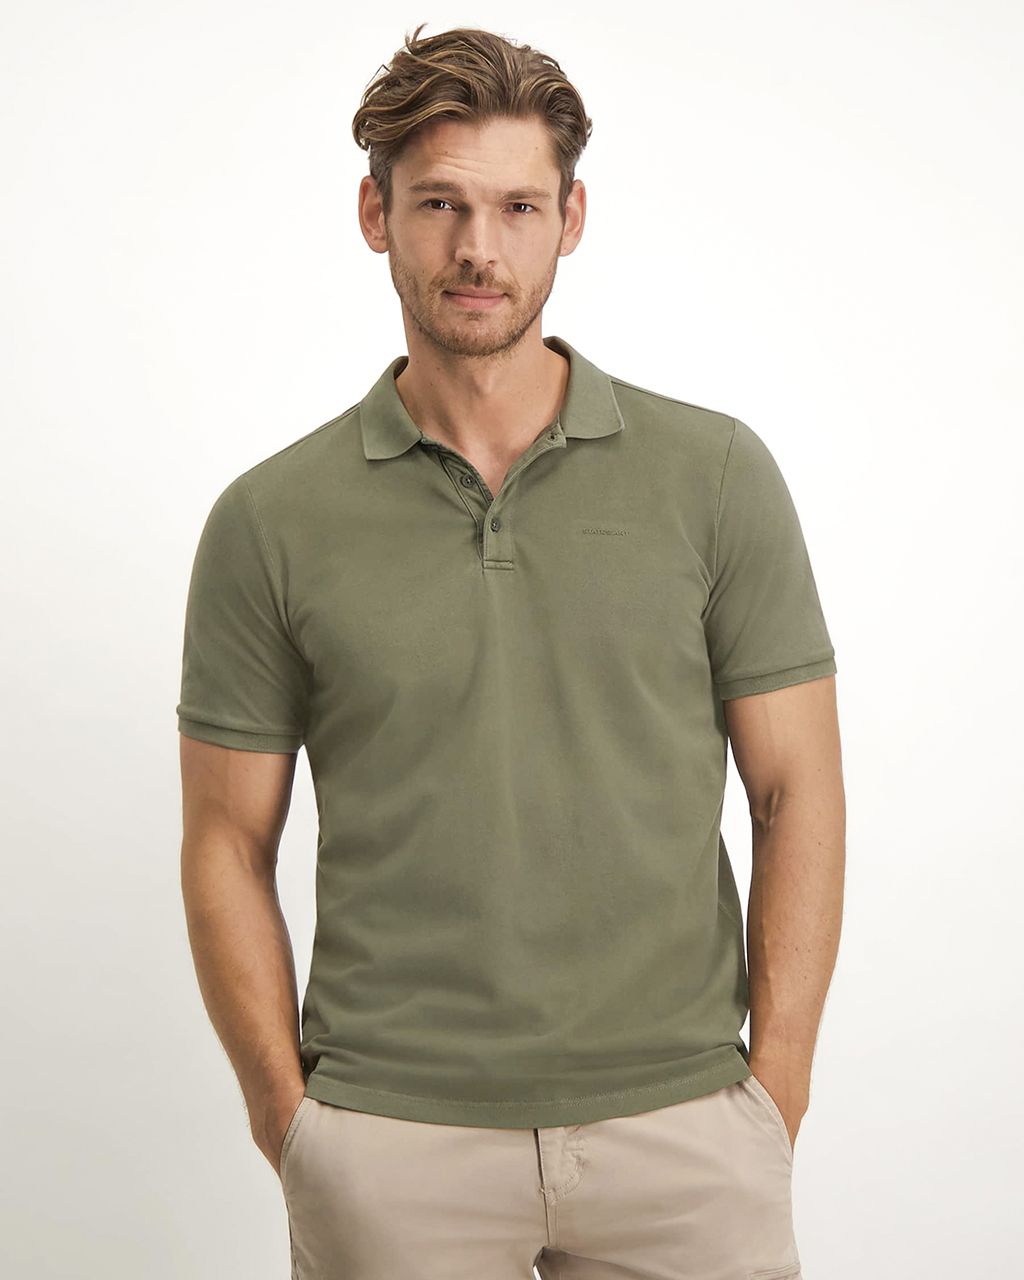 State of Art Polo KM Groen dessin 075920-001-4XL